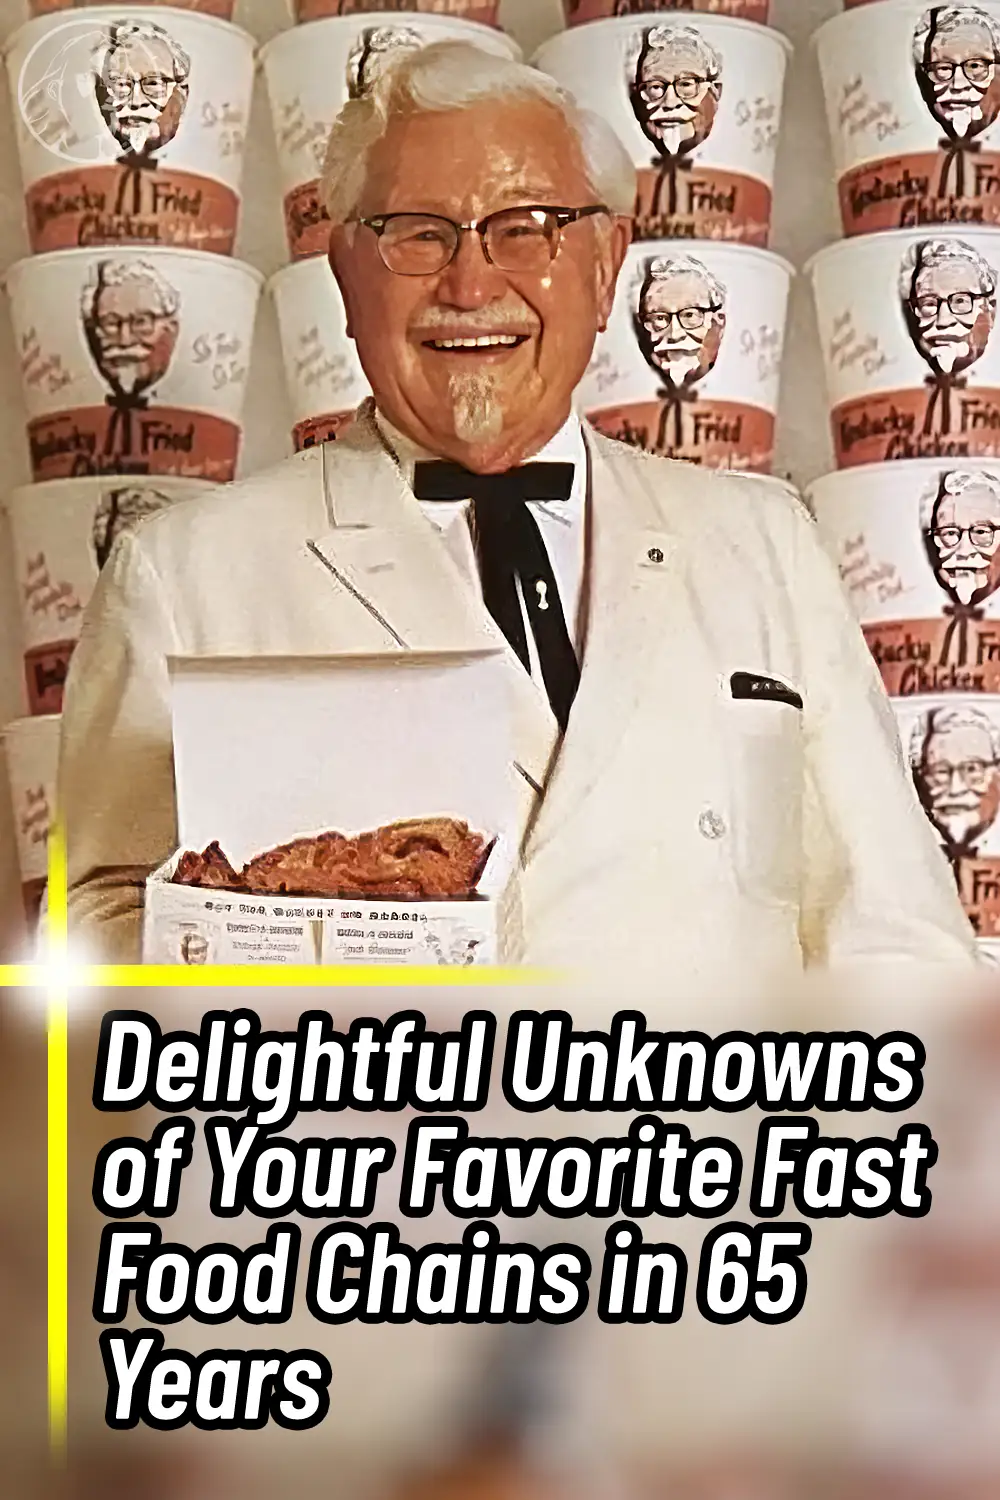 Delightful Unknowns of Your Favorite Fast Food Chains in 65 Years